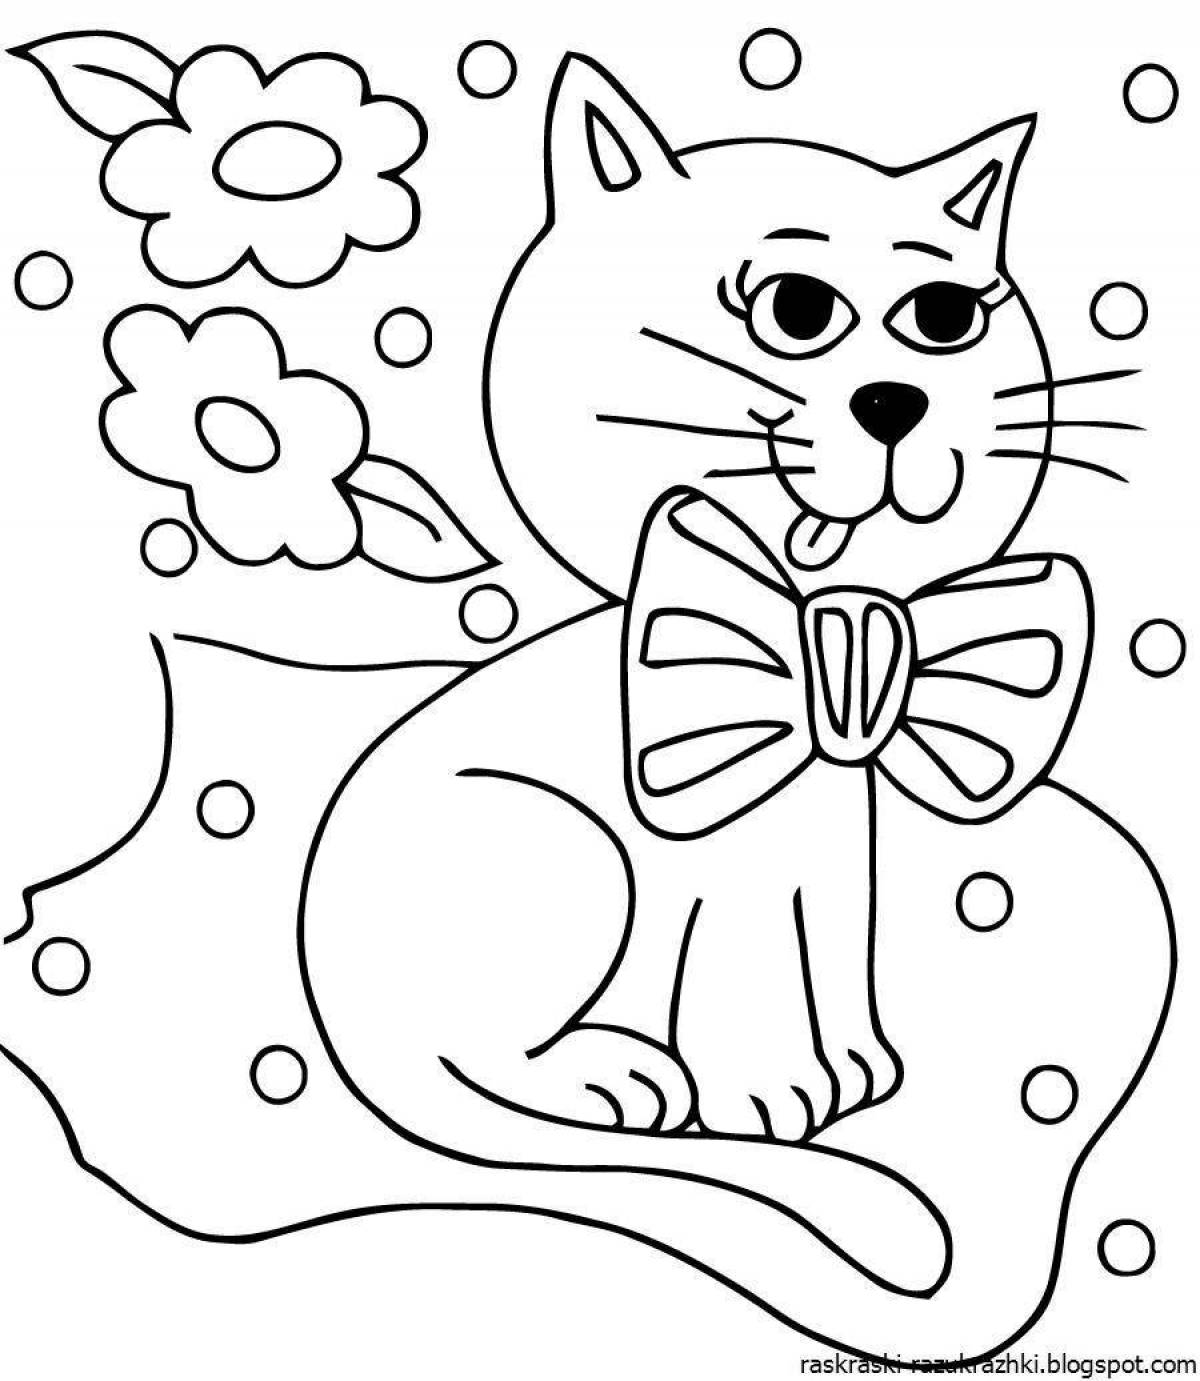 Coloring kitty for children 4-5 years old